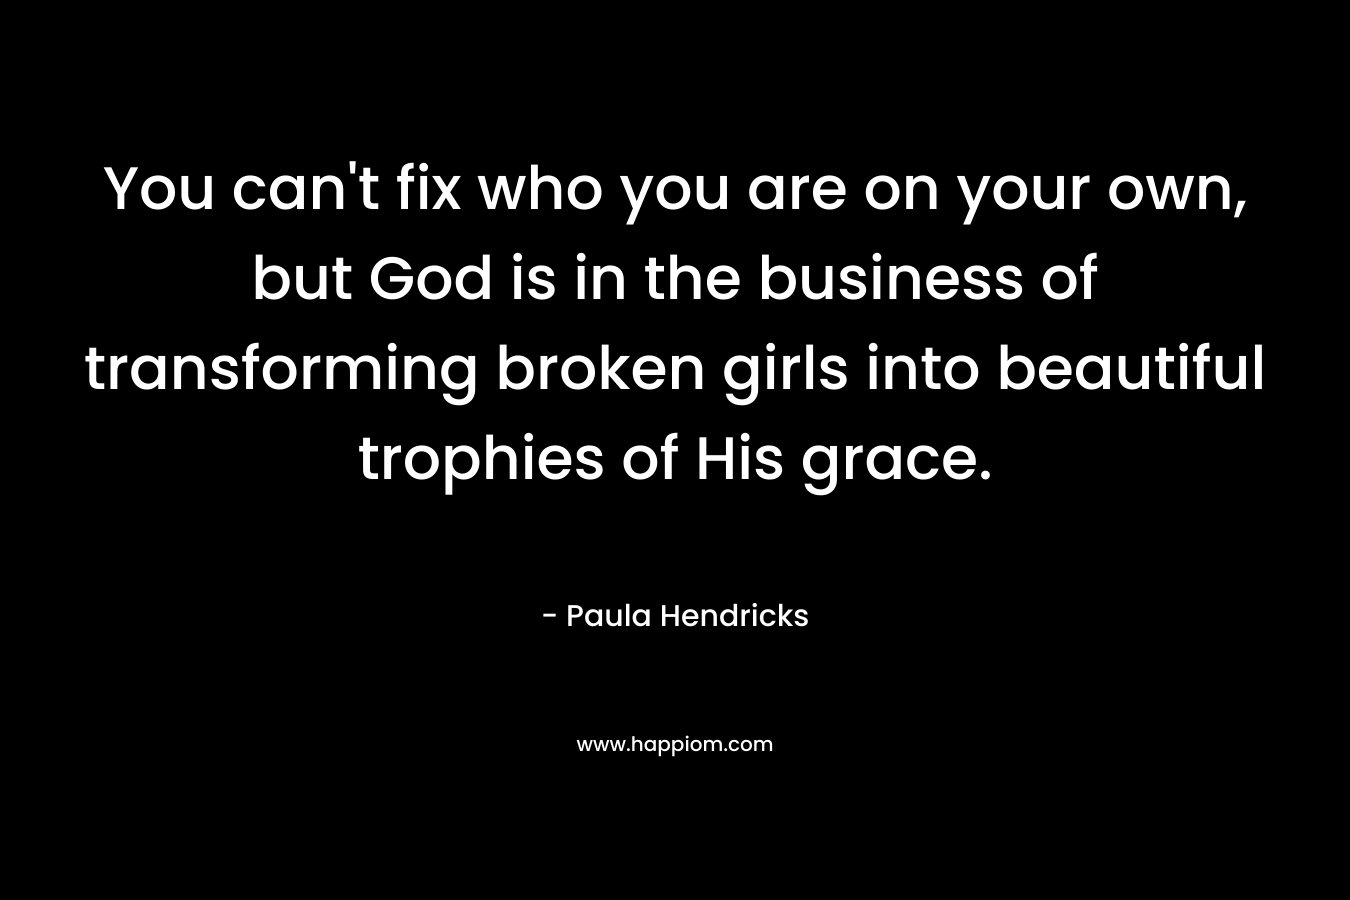 You can't fix who you are on your own, but God is in the business of transforming broken girls into beautiful trophies of His grace.